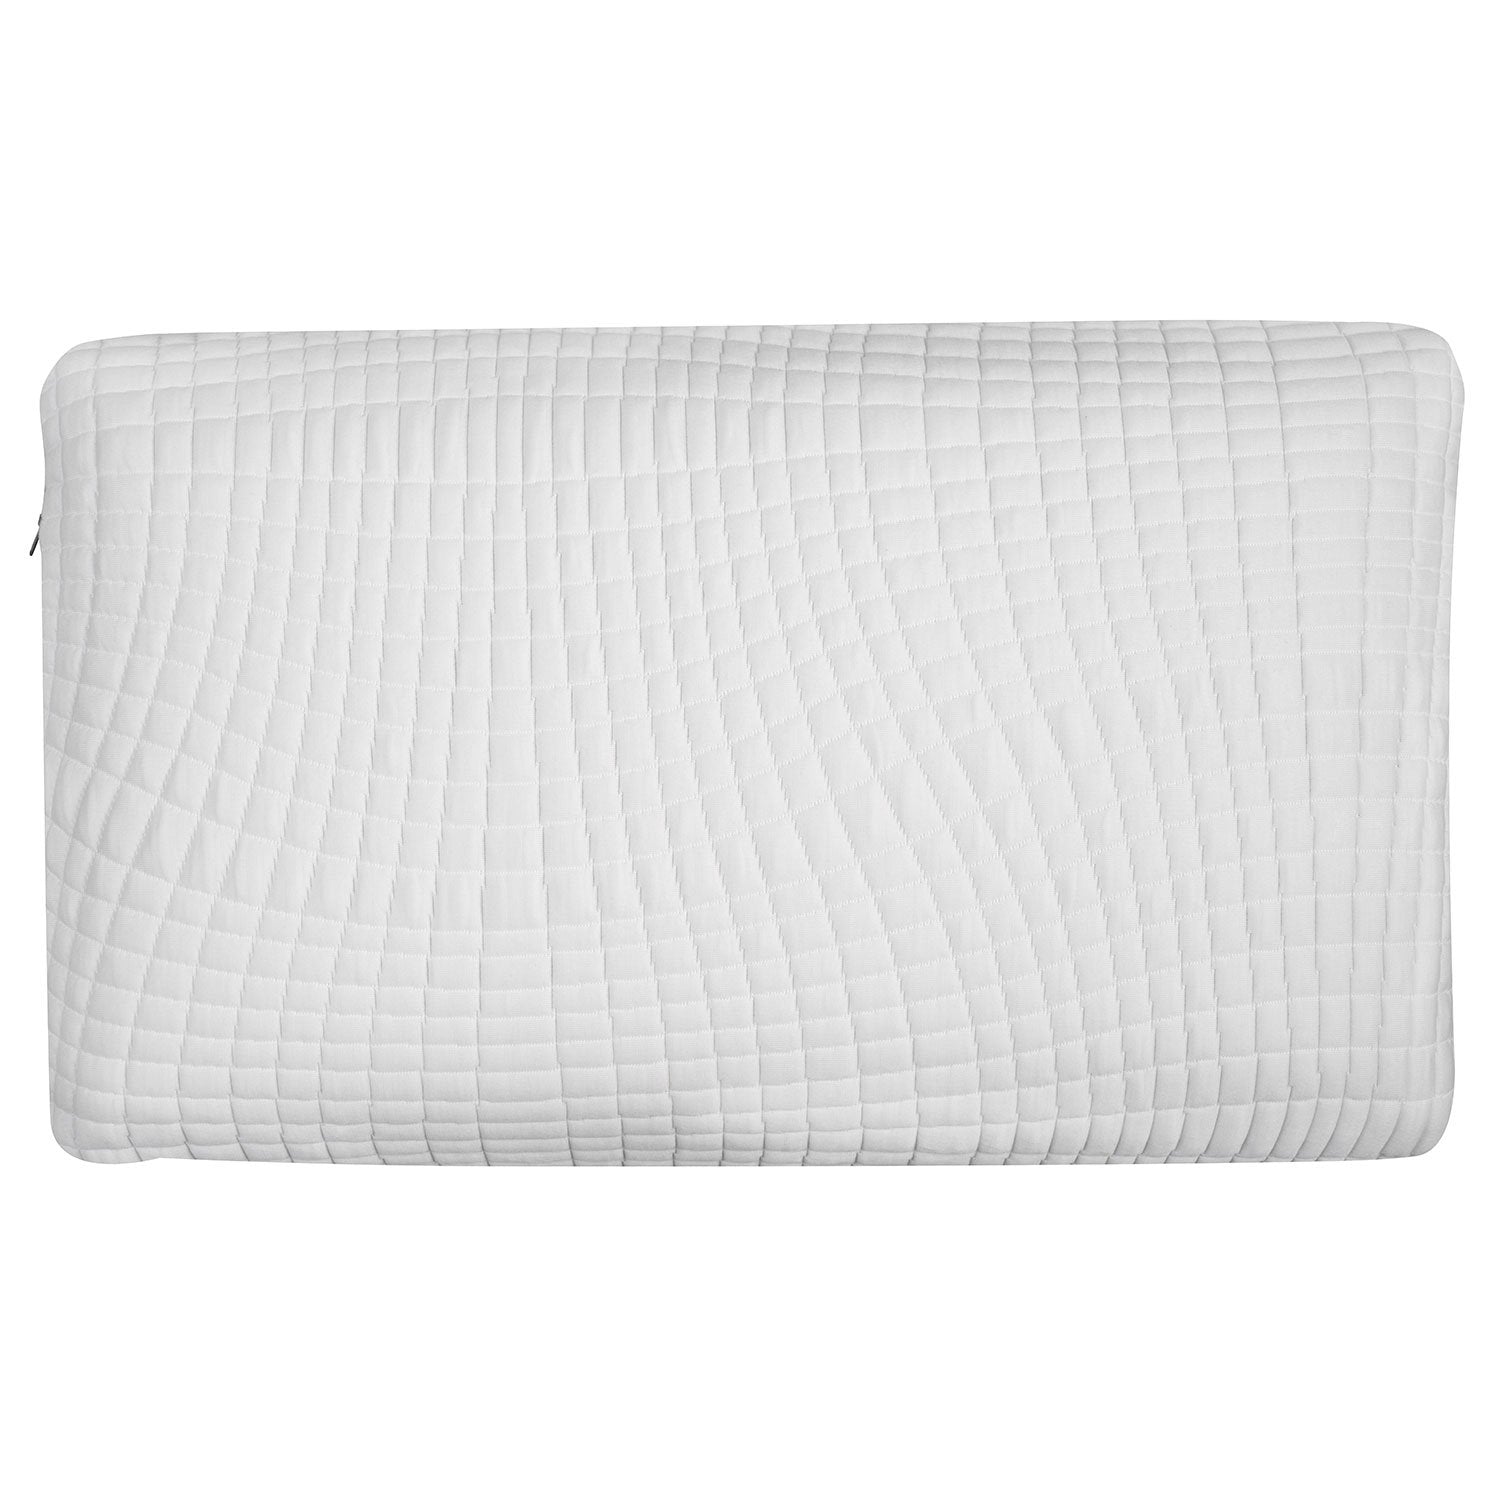 Ventilated Charcoal Bamboo Infused Memory Foam Pillow - Washable Cover - zzZensleep